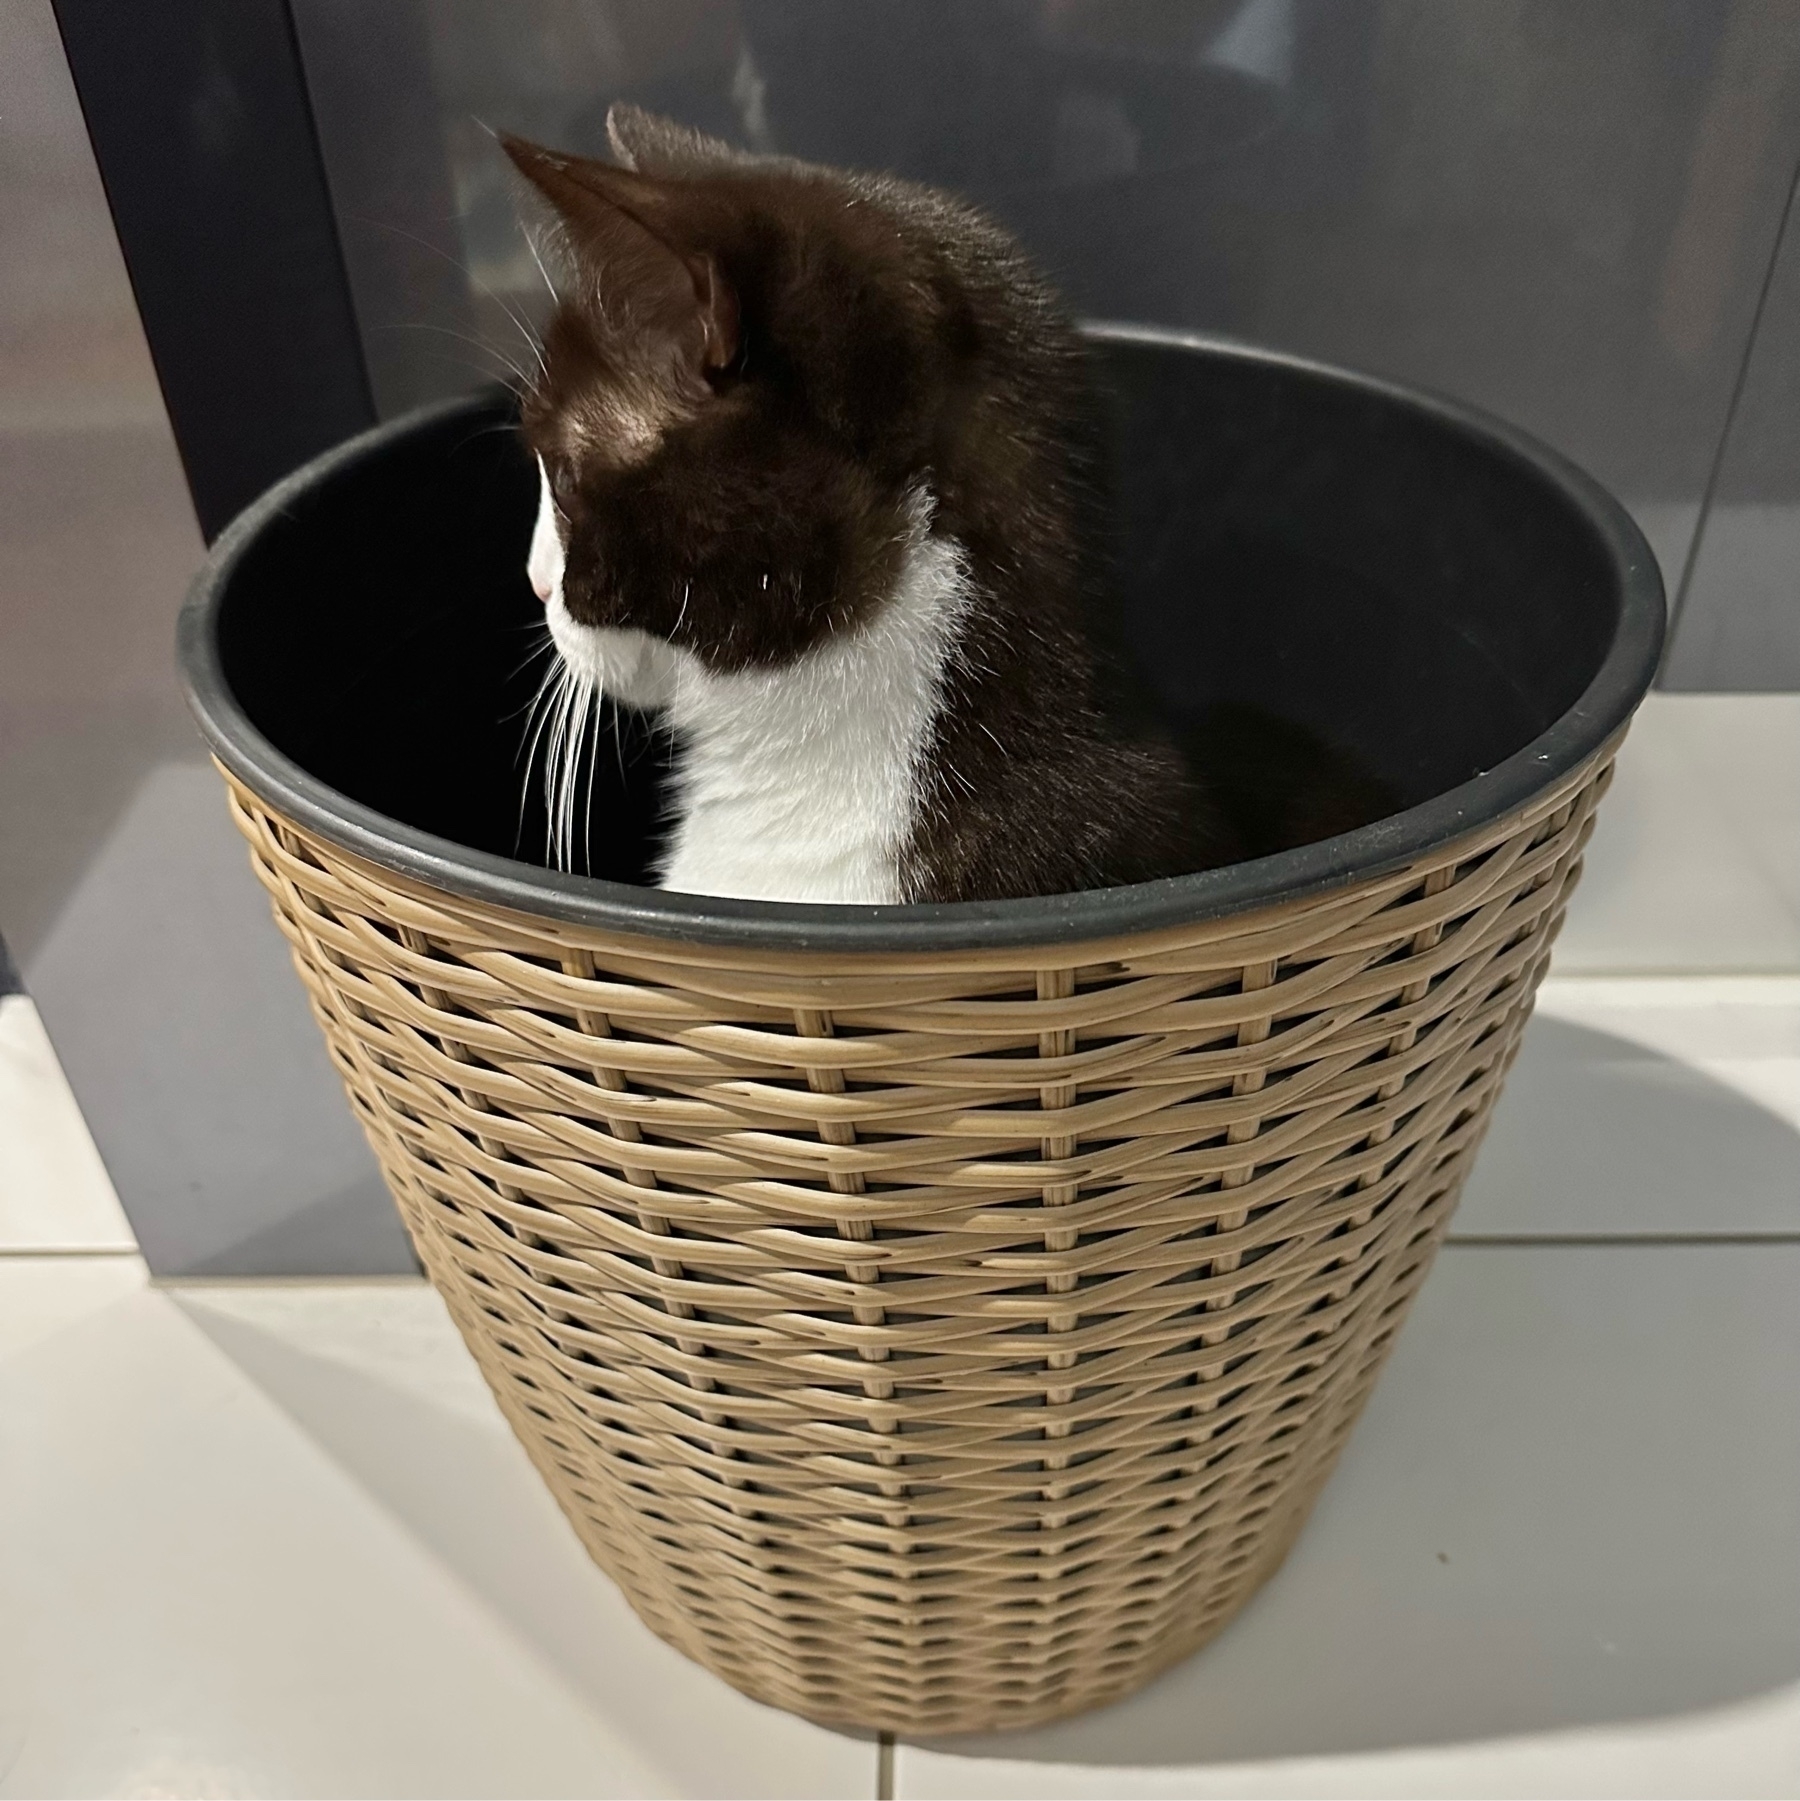 A large woven basket sitting on white tiles. A black and white cat is sitting upright inside the pot. The cat is sitting side on so her white belly and black back is clearly visible as is her black head and white chin.